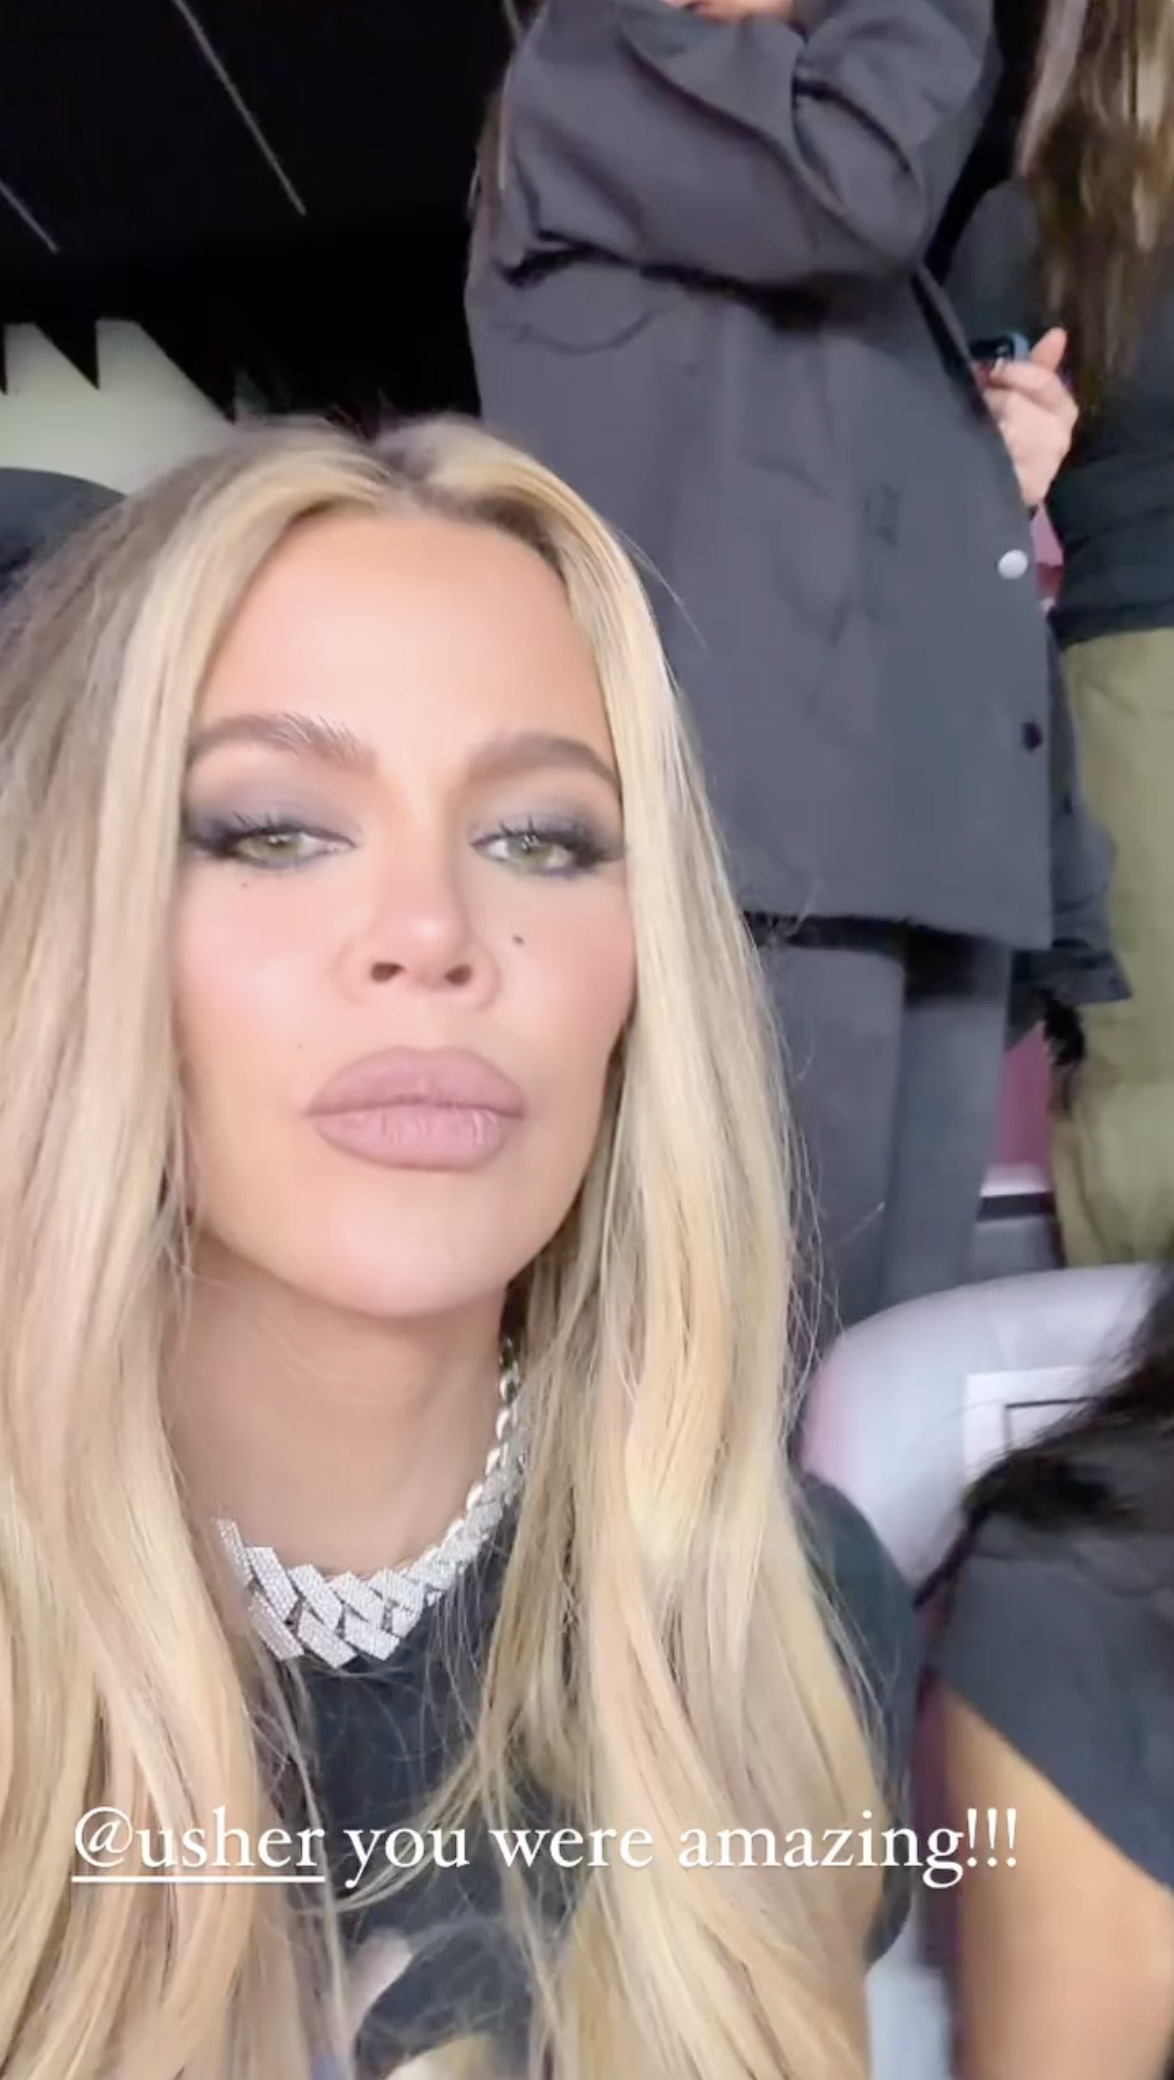 Khloe has faced years of plastic surgery speculation